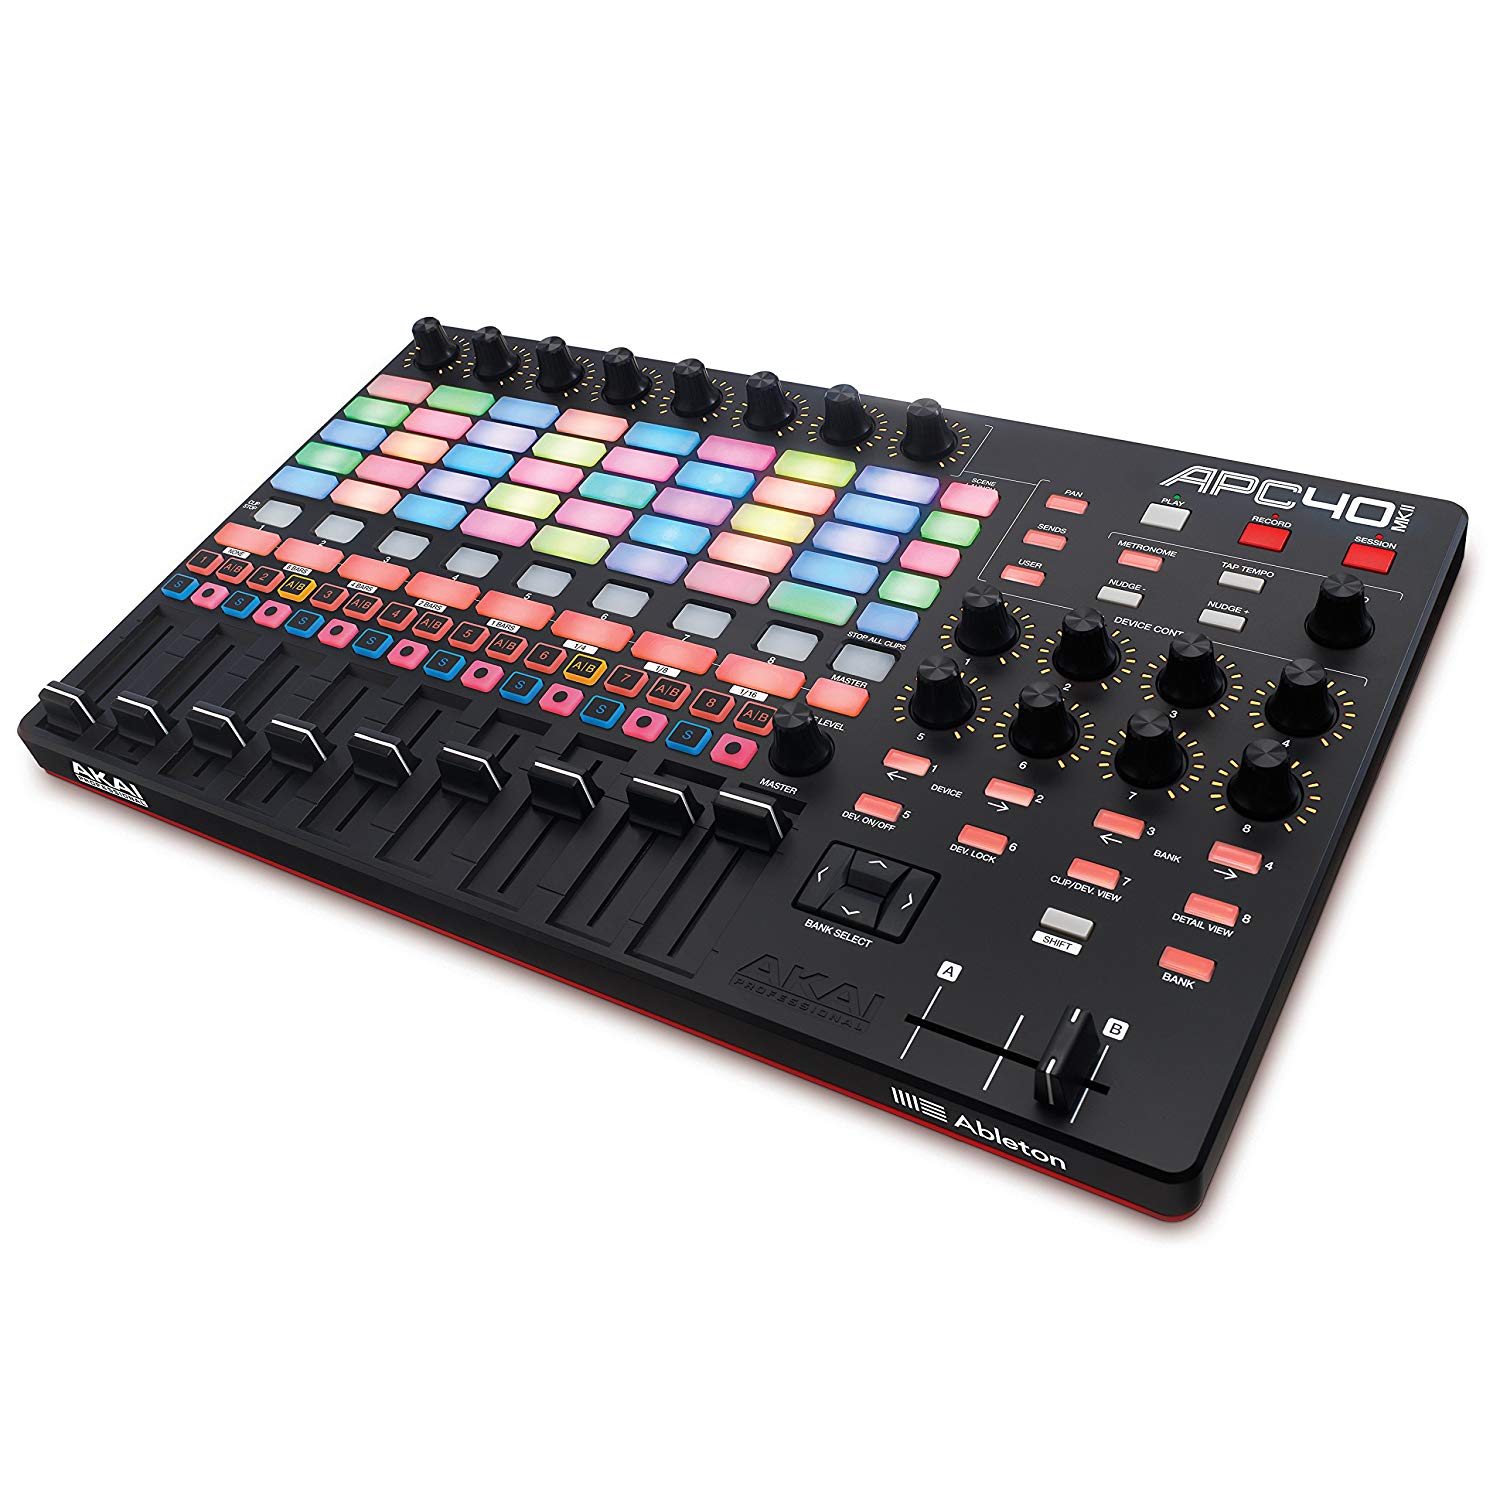 5 Best Ableton Controllers Reviewed in Detail [Mar. 2023]